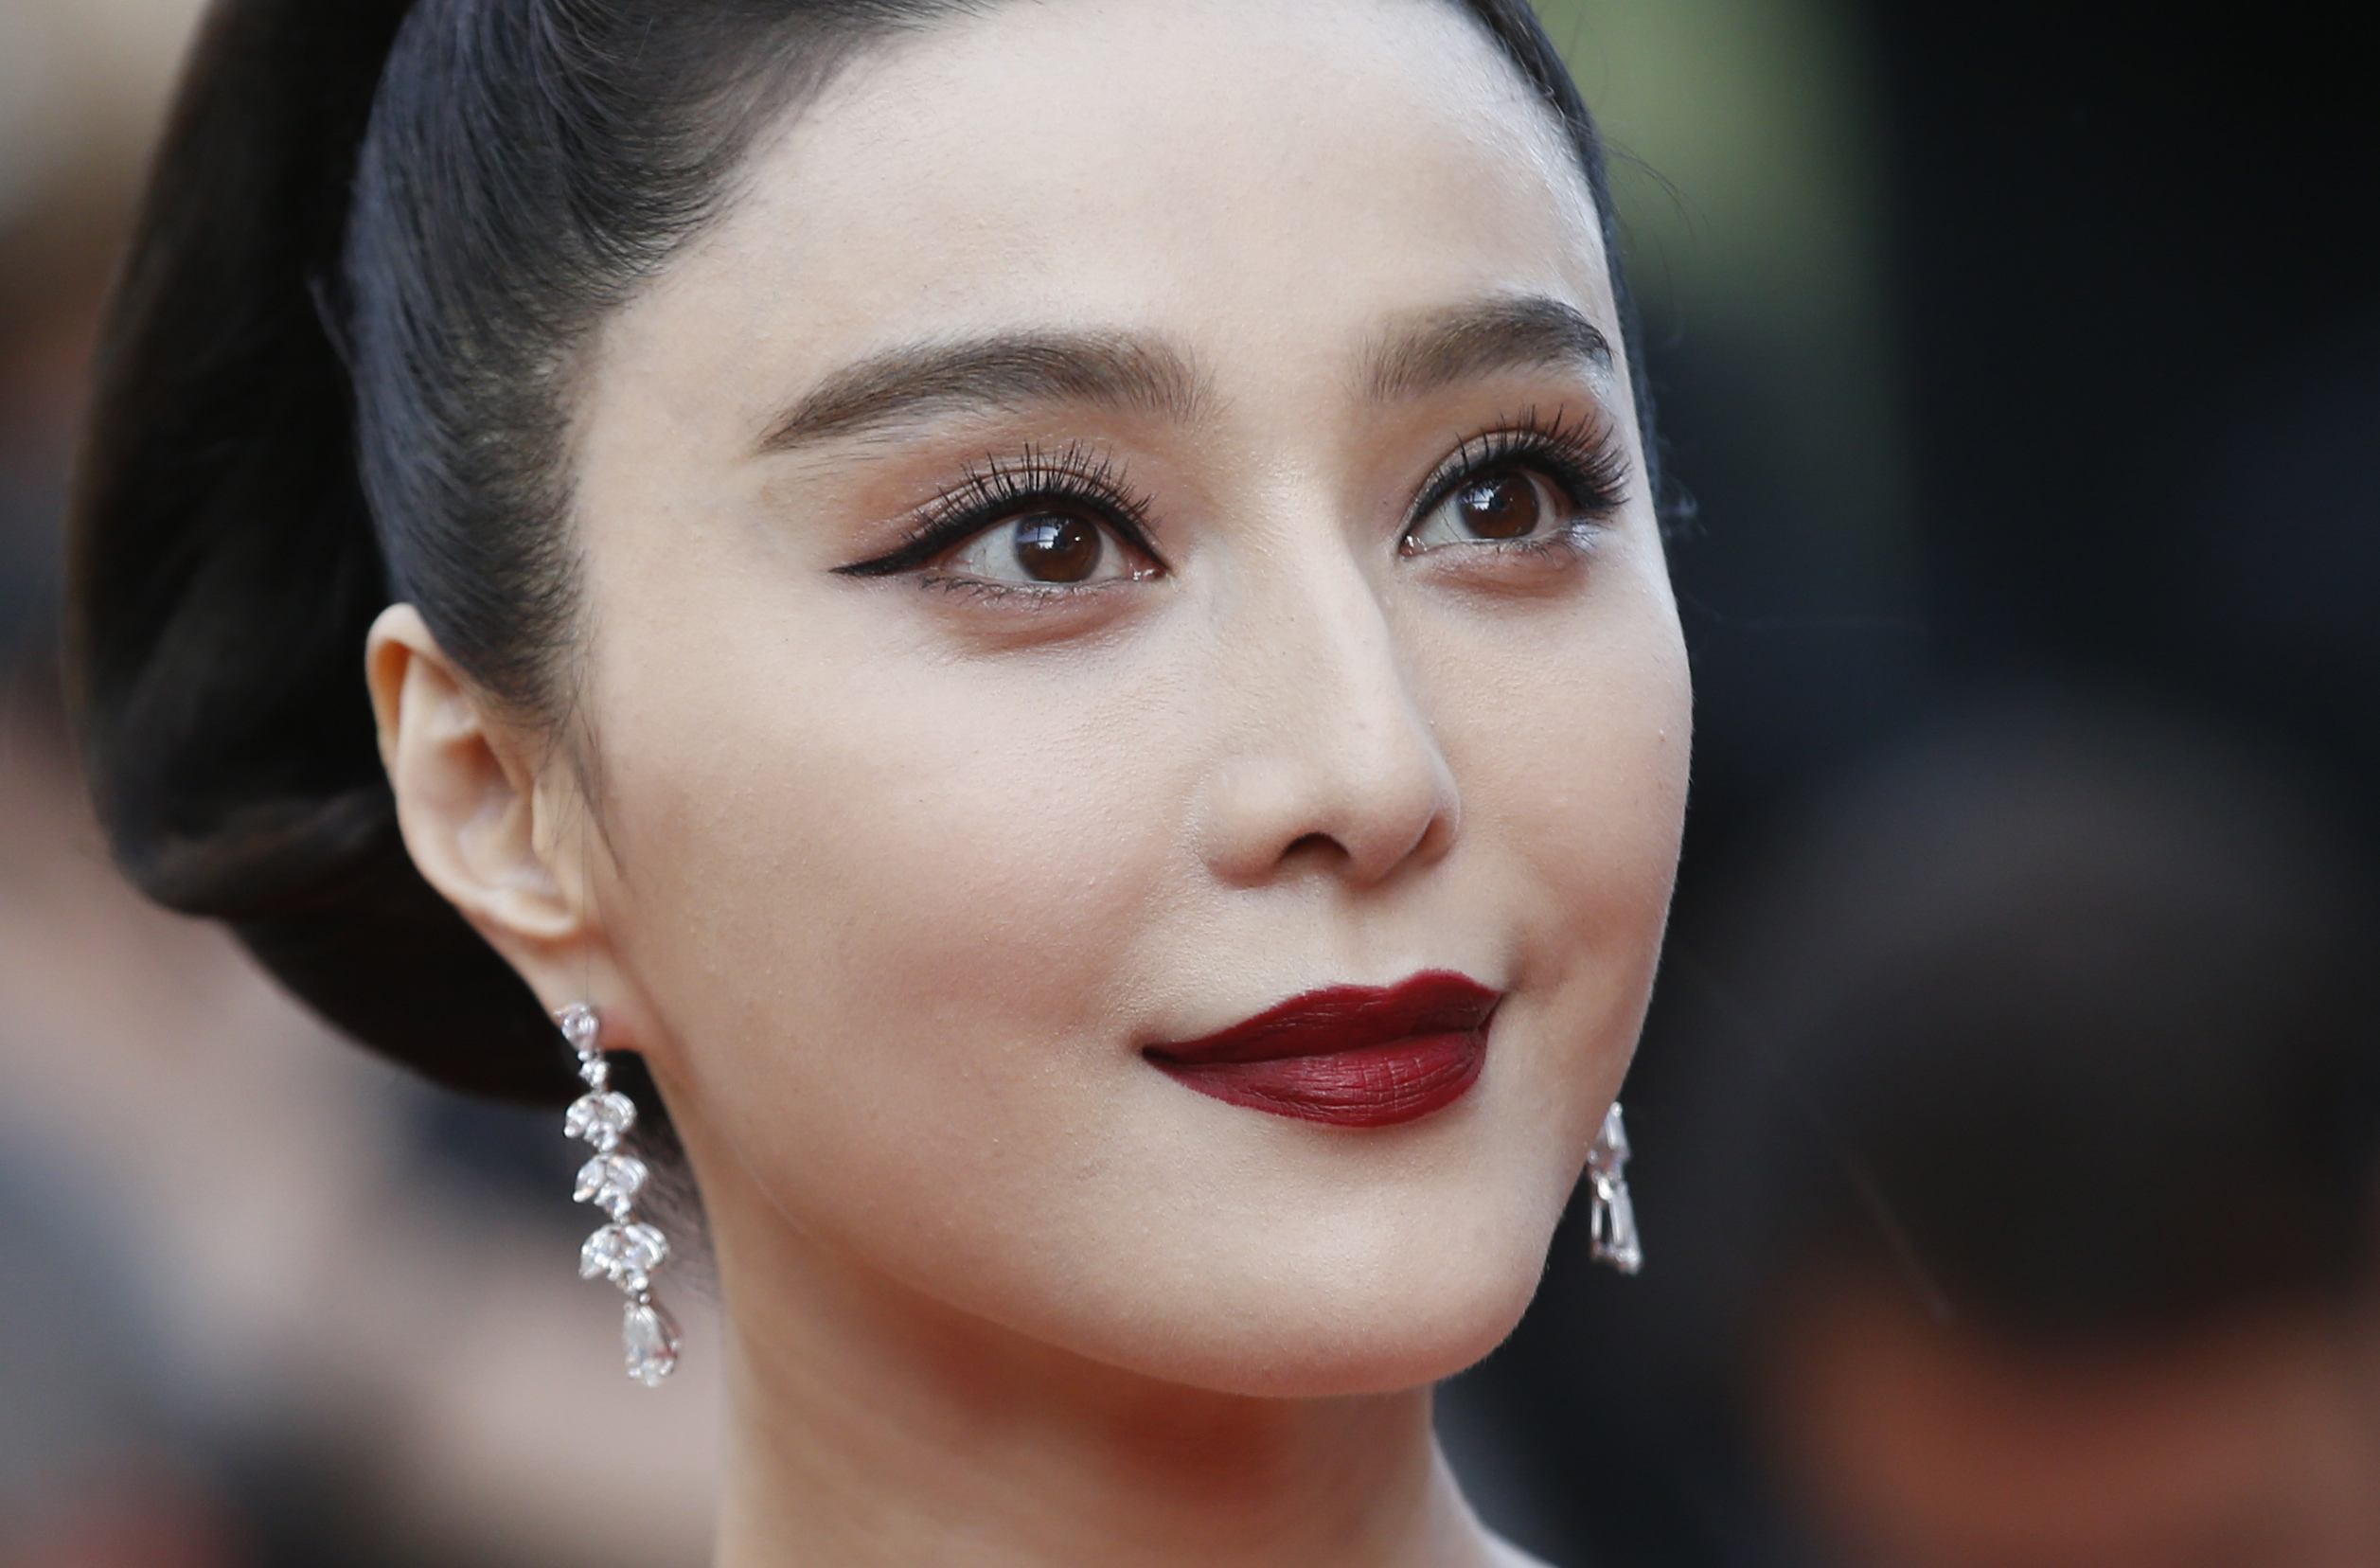 FILE - In this May 24, 2017, file photo, Fan Bingbing poses for photographers as she arrives for the screening of the film The Beguiled at the 70th international film festival, Cannes, southern France. Fan Bingbing, one of China's best-known starlets and a rising Hollywood star, has well and truly fallen off the map amid vague allegations of tax shenanigans and possibly other infractions that have put her at odds with China's Communist Party-appointed culture czars. (AP Photo/Alastair Grant, File)